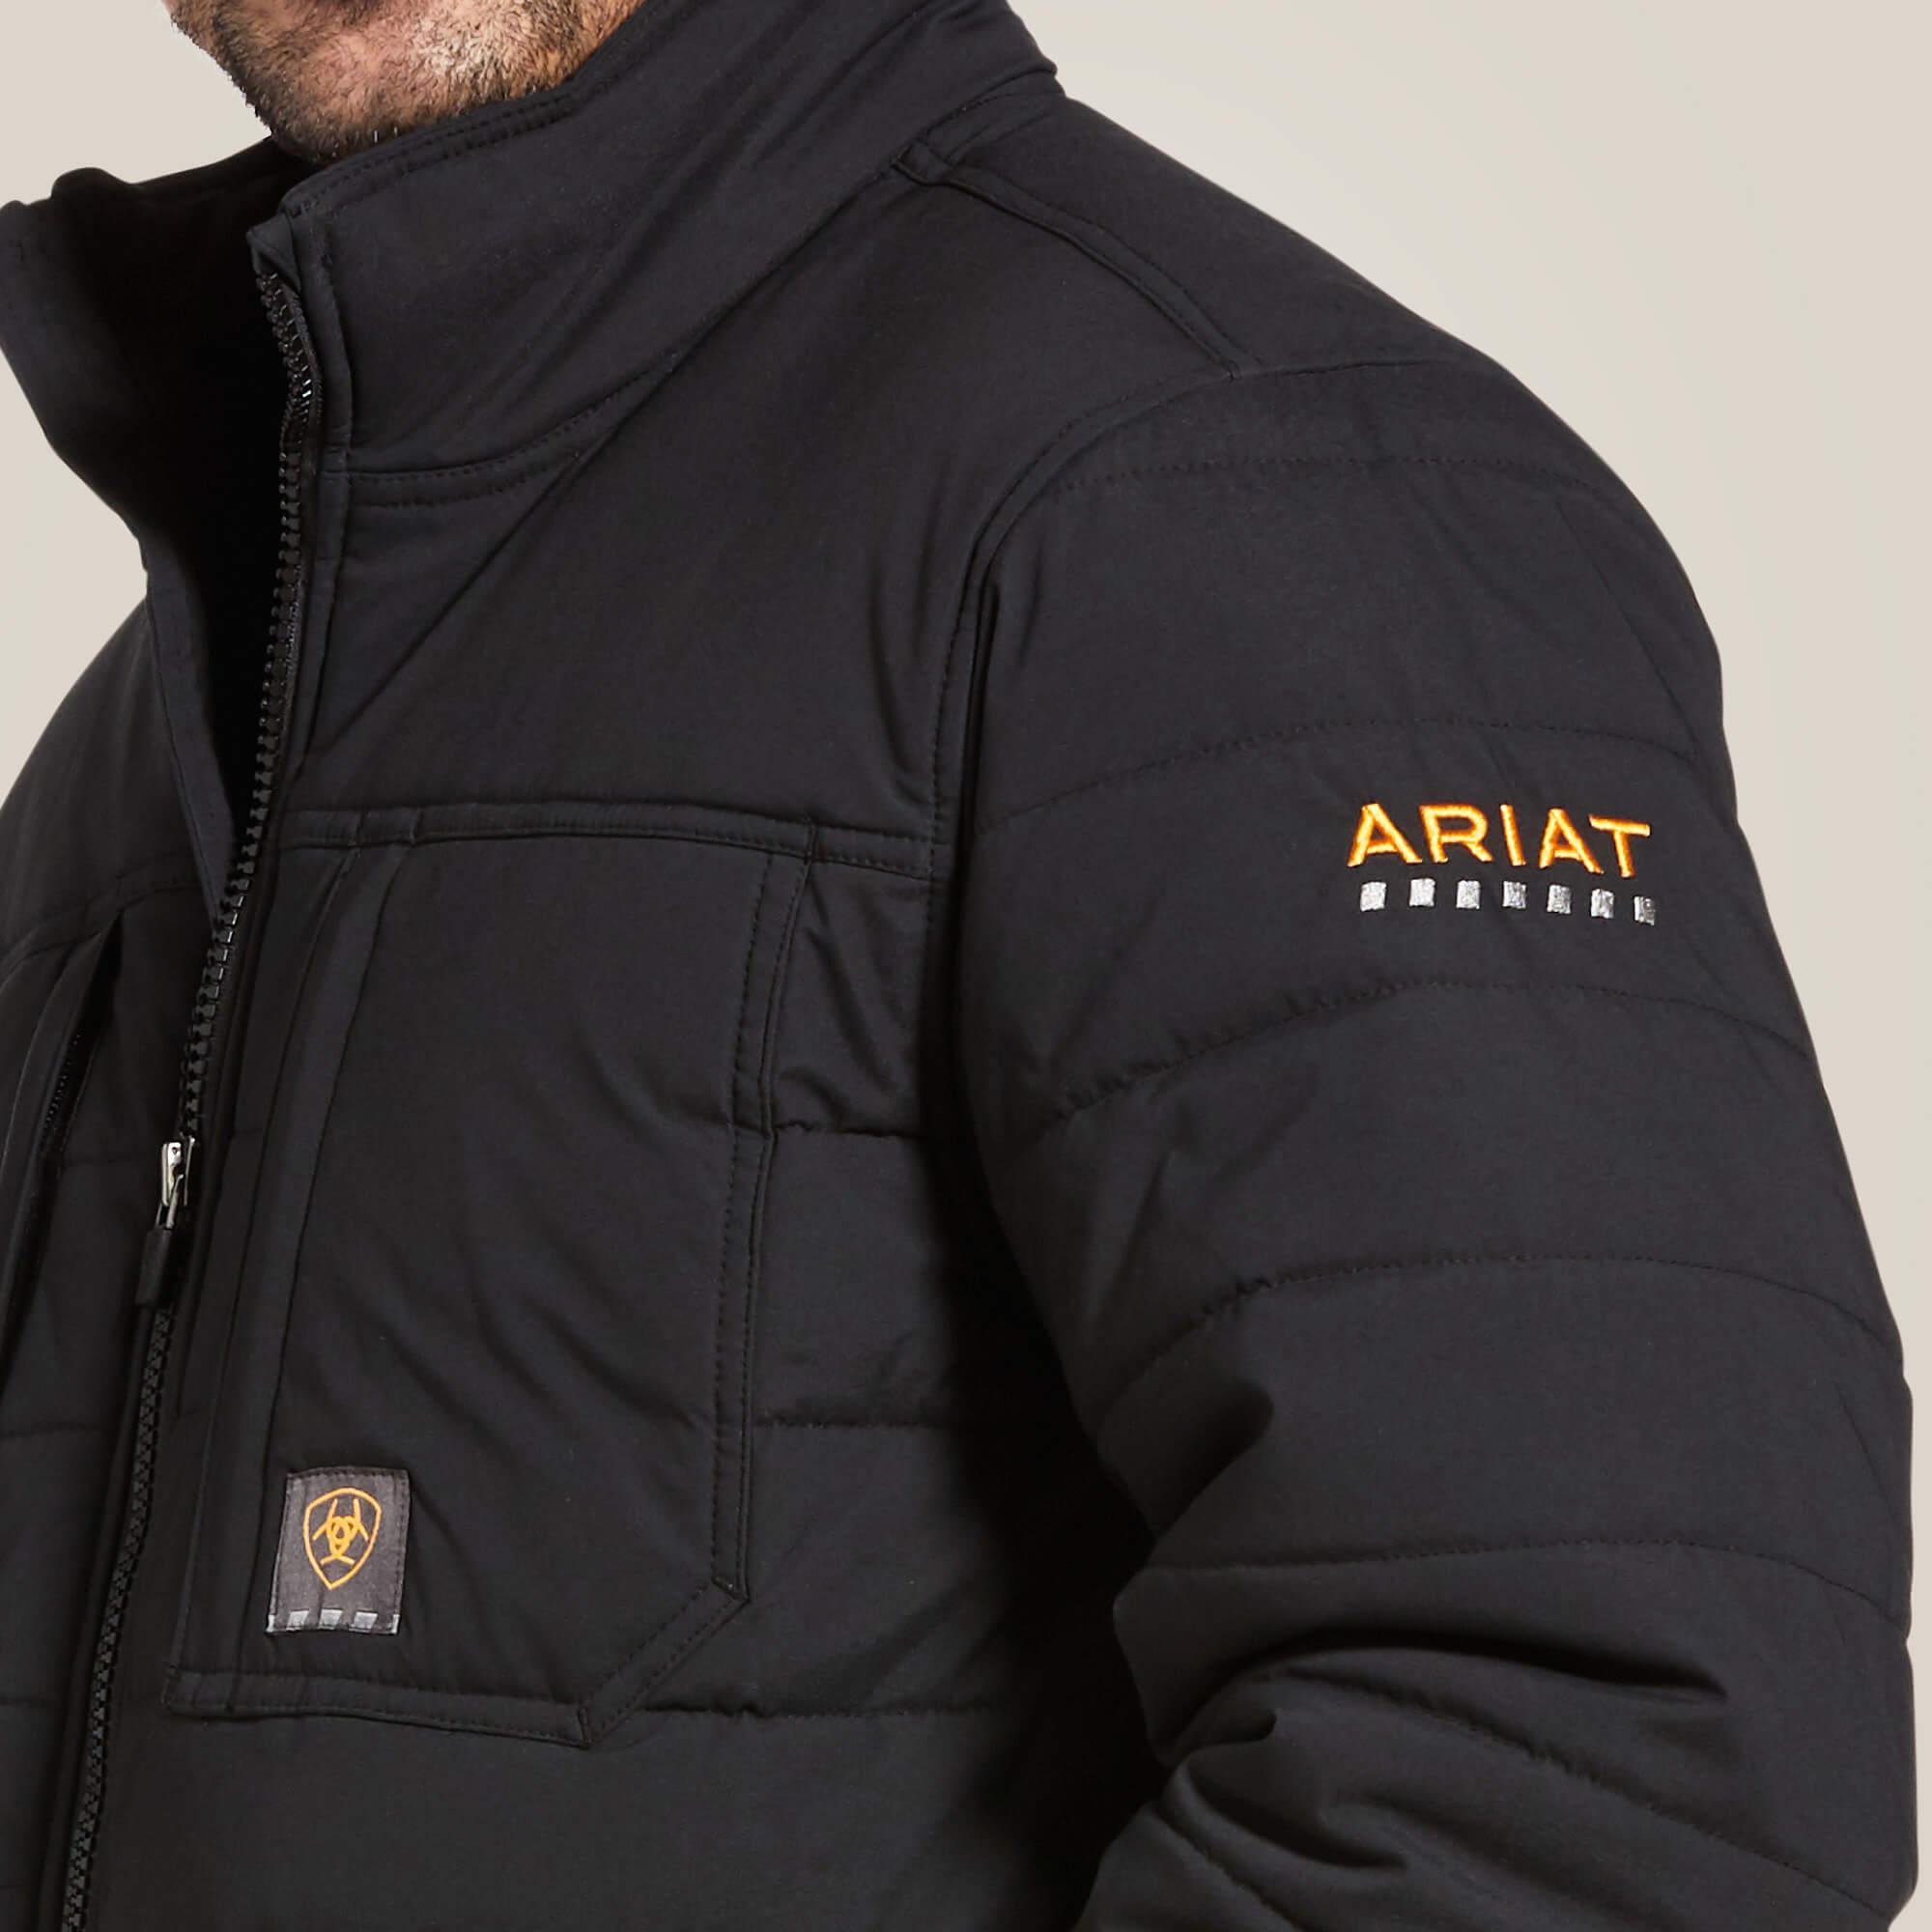 Rebar Valiant Stretch Canvas Water Resistant Insulated Jacket - Black - Purpose-Built / Home of the Trades